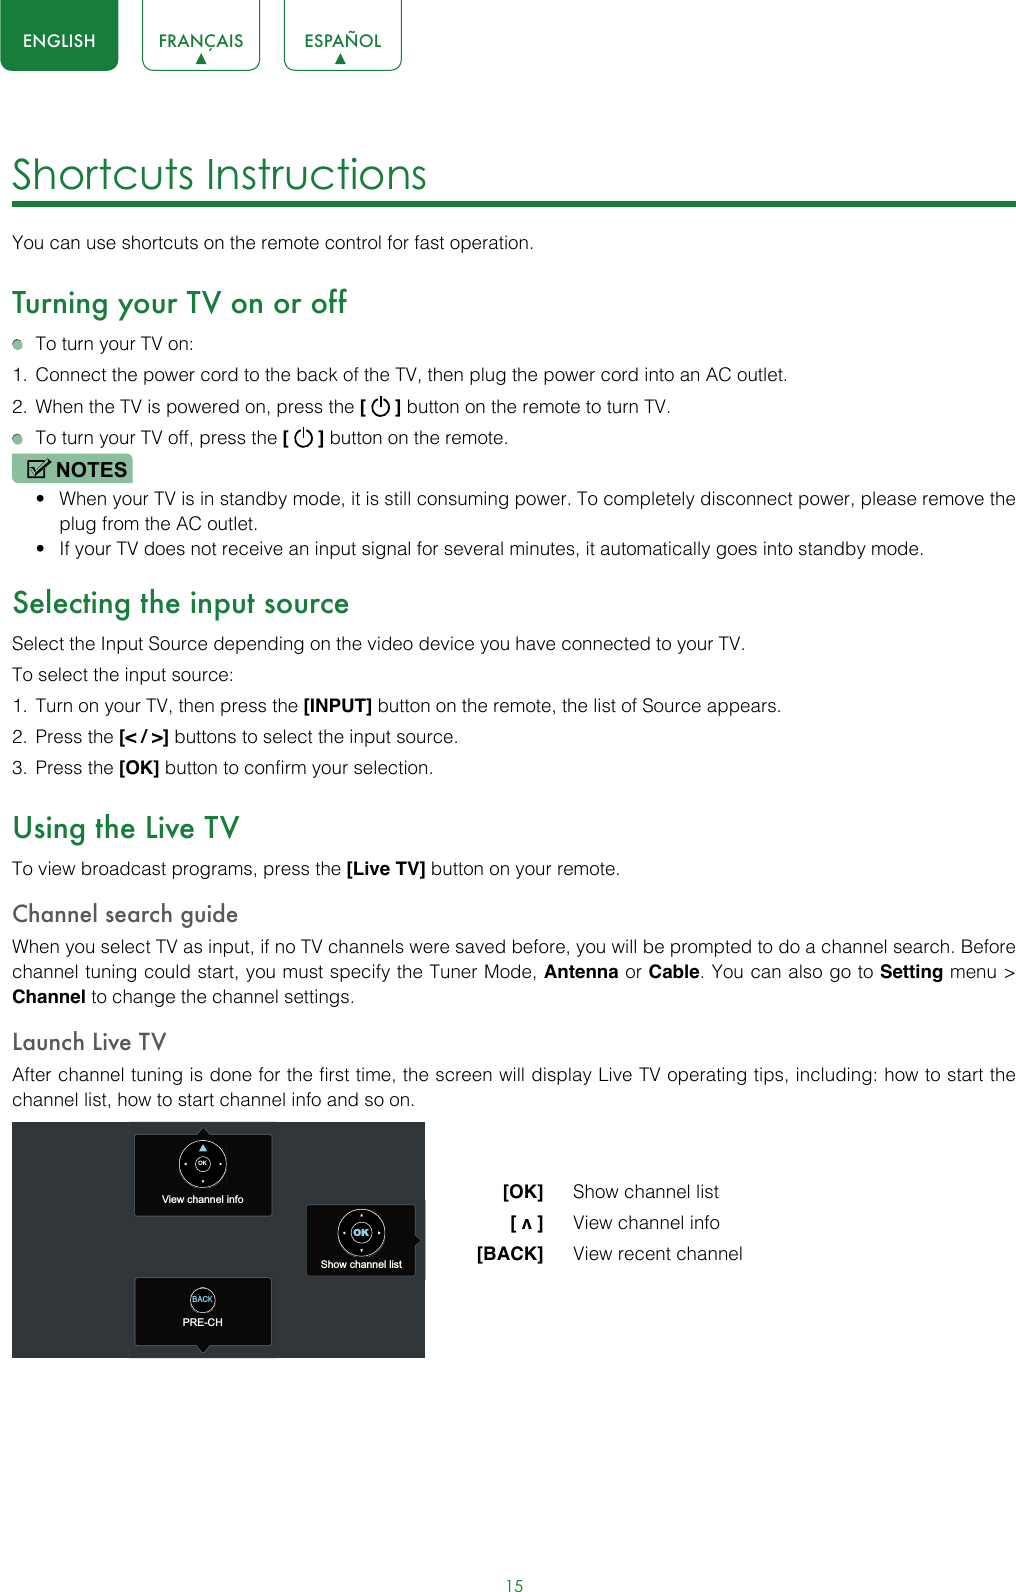 15ENGLISH FRANÇAIS ESPAÑOLShortcuts Instructions You can use shortcuts on the remote control for fast operation. Turning your TV on or off  To turn your TV on:1.  Connect the power cord to the back of the TV, then plug the power cord into an AC outlet.2.  When the TV is powered on, press the [   ] button on the remote to turn TV.  To turn your TV off, press the [   ] button on the remote.NOTES• When your TV is in standby mode, it is still consuming power. To completely disconnect power, please remove the  plug from the AC outlet.• If your TV does not receive an input signal for several minutes, it automatically goes into standby mode.Selecting the input sourceSelect the Input Source depending on the video device you have connected to your TV.To select the input source:1.  Turn on your TV, then press the [INPUT] button on the remote, the list of Source appears.2.  Press the [&lt; / &gt;] buttons to select the input source.3.  Press the [OK] button to confirm your selection.Using the Live TVTo view broadcast programs, press the [Live TV] button on your remote.Channel search guideWhen you select TV as input, if no TV channels were saved before, you will be prompted to do a channel search. Before channel tuning could start, you must specify the Tuner Mode, Antenna or Cable. You can also go to Setting menu &gt; Channel to change the channel settings.Launch Live TVAfter channel tuning is done for the first time, the screen will display Live TV operating tips, including: how to start the channel list, how to start channel info and so on.  [OK]   Show channel list [ v ]   View channel info [BACK]   View recent channelView channel infoPRE-CHShow channel listOKOKBACK